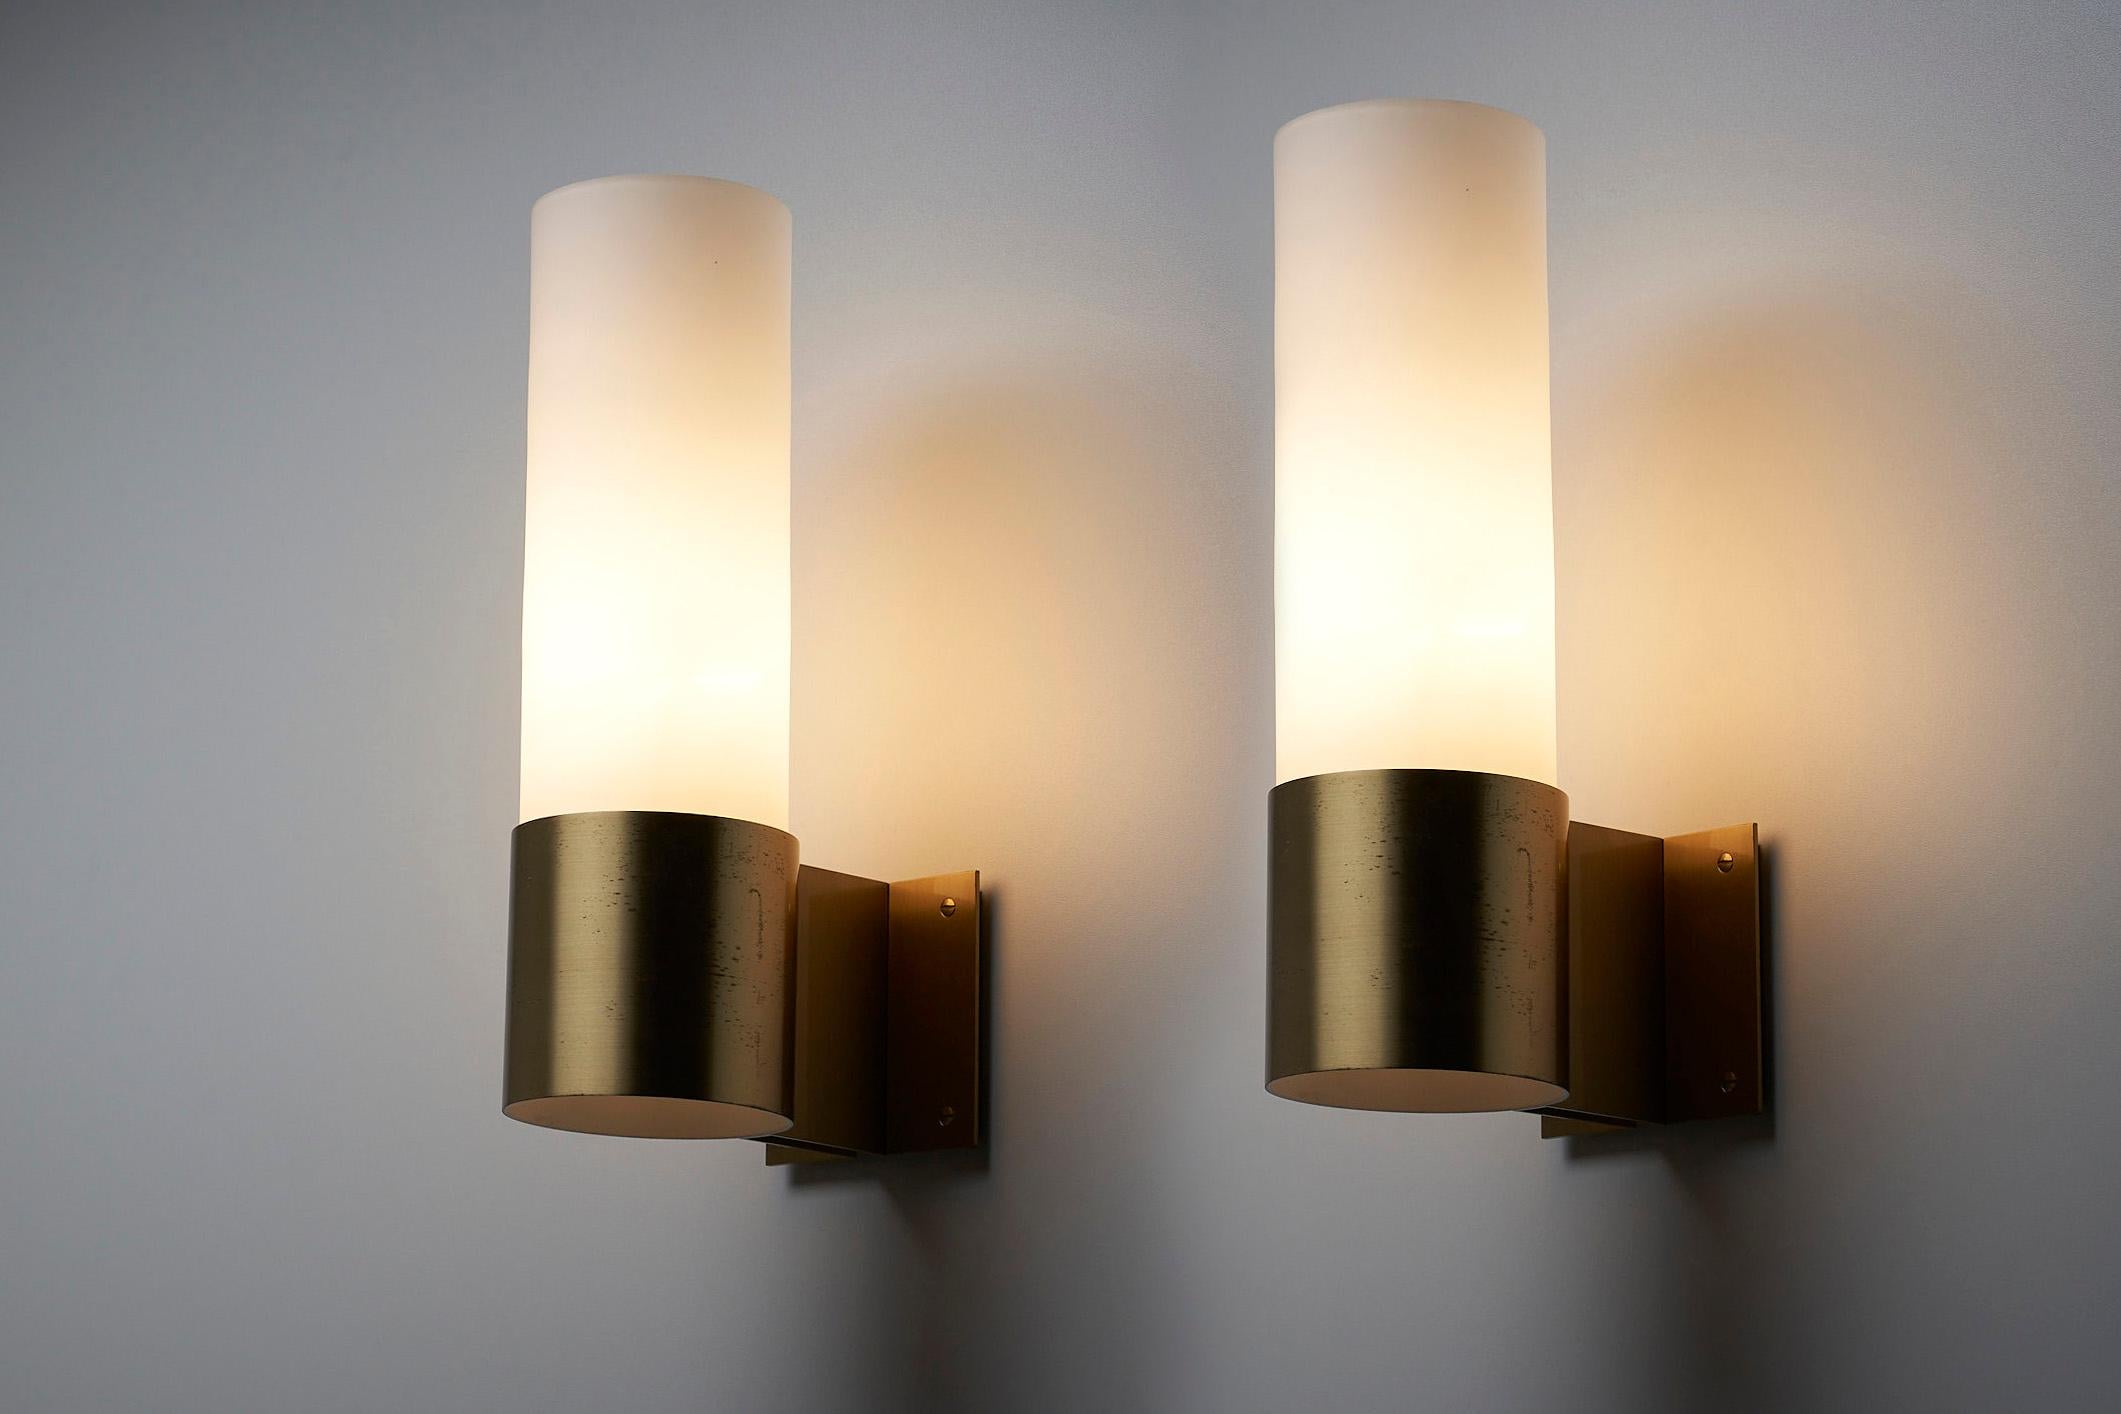 Add a touch of minimalist elegance to your space with the Brass With Glass Wall Sconce by Fog&Mørup, designed by Jorgen Bo in Denmark in 1960. This wall sconce showcases a sleek and refined design that seamlessly combines brass and glass